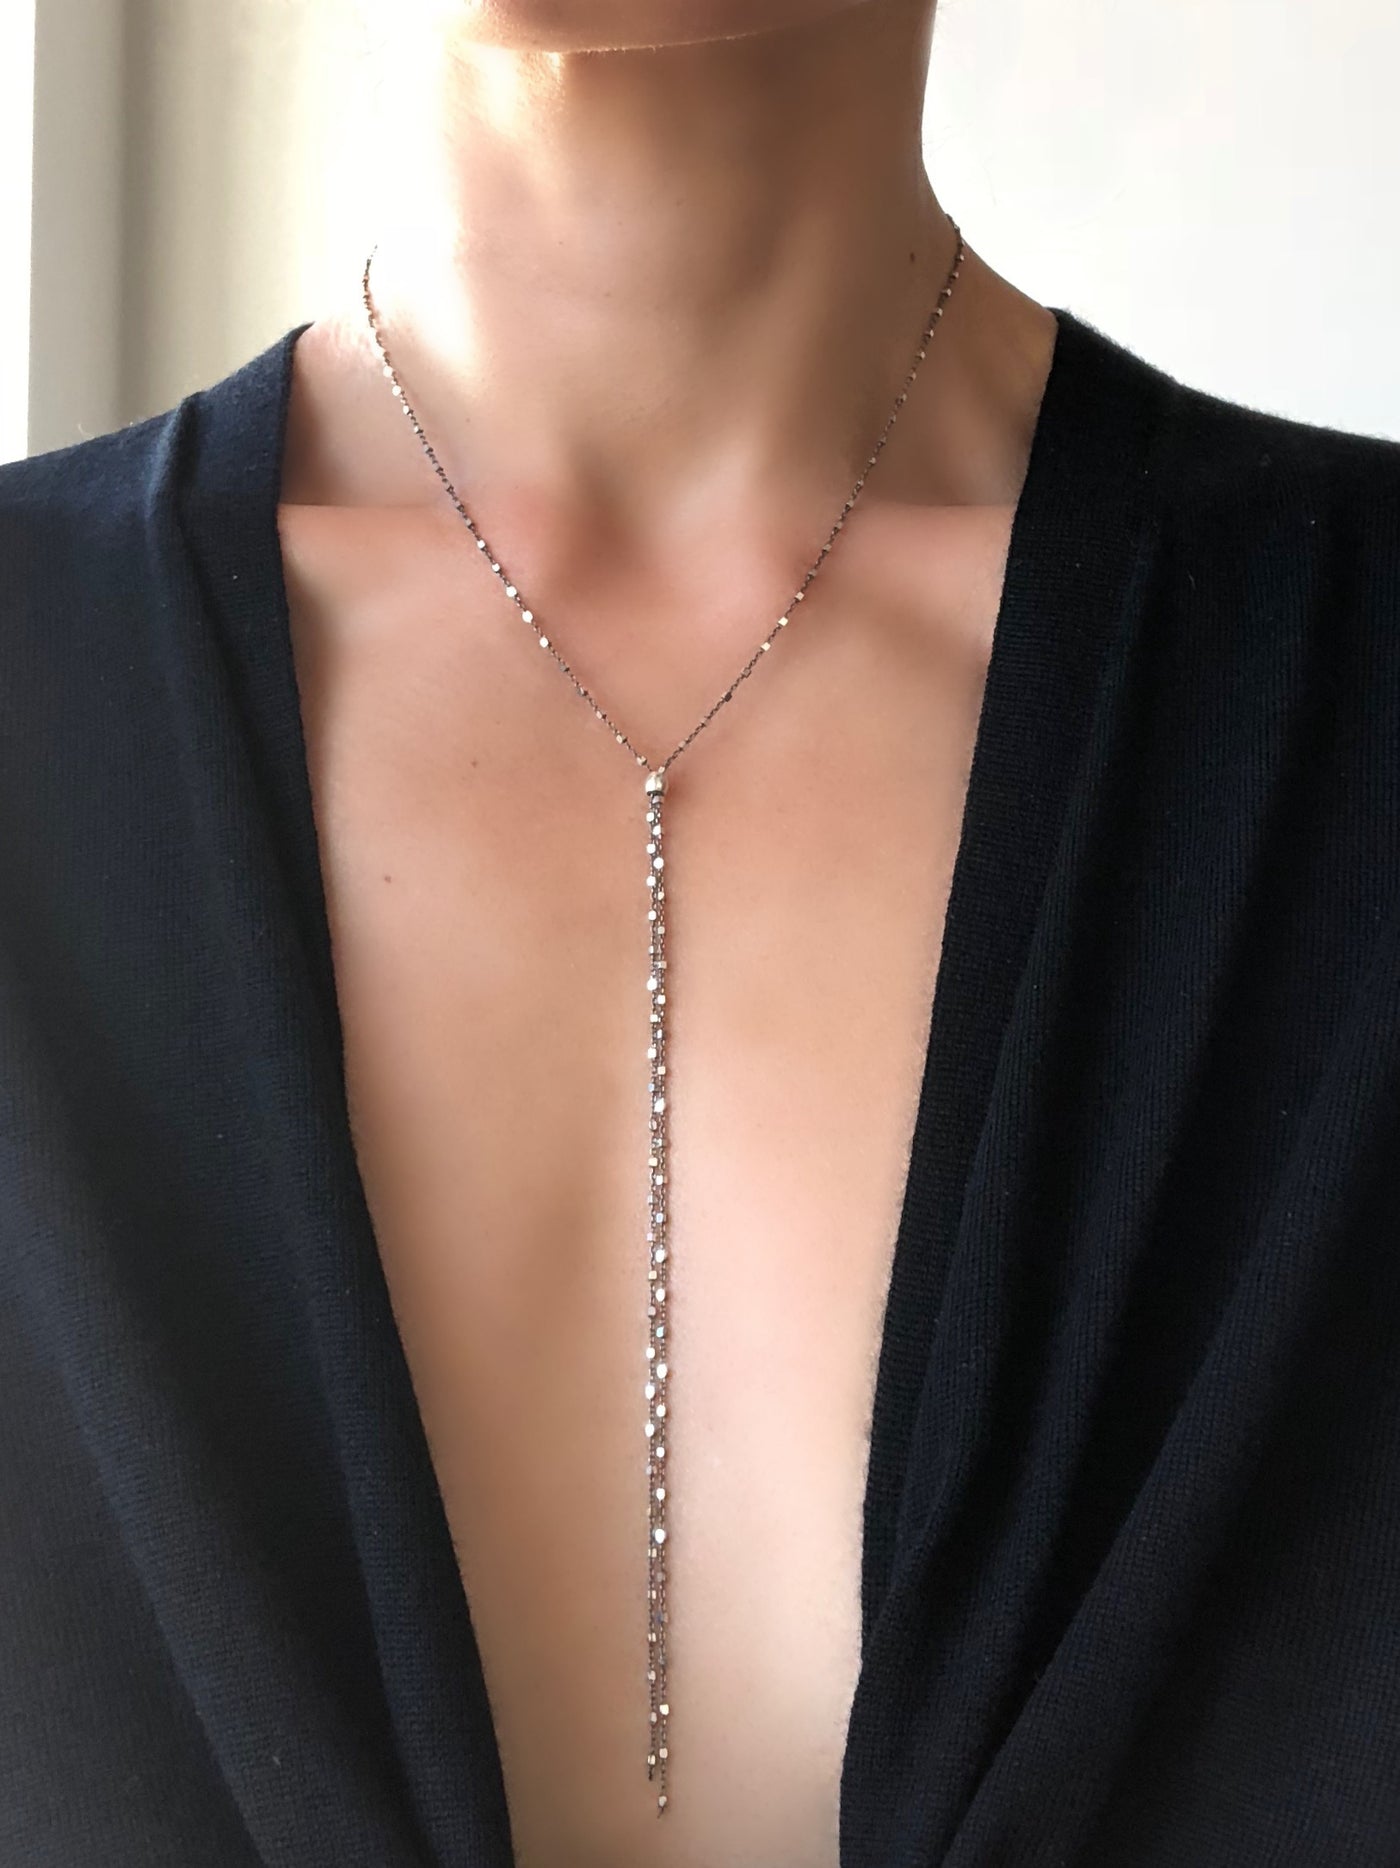 Bolo Necklace | Holiday Jewelry | Rebecca Scott Jewelry | Handmade | Made in USA | Rose Gold | Feminine jewelry | holiday gift | gift for her | oxidized silver